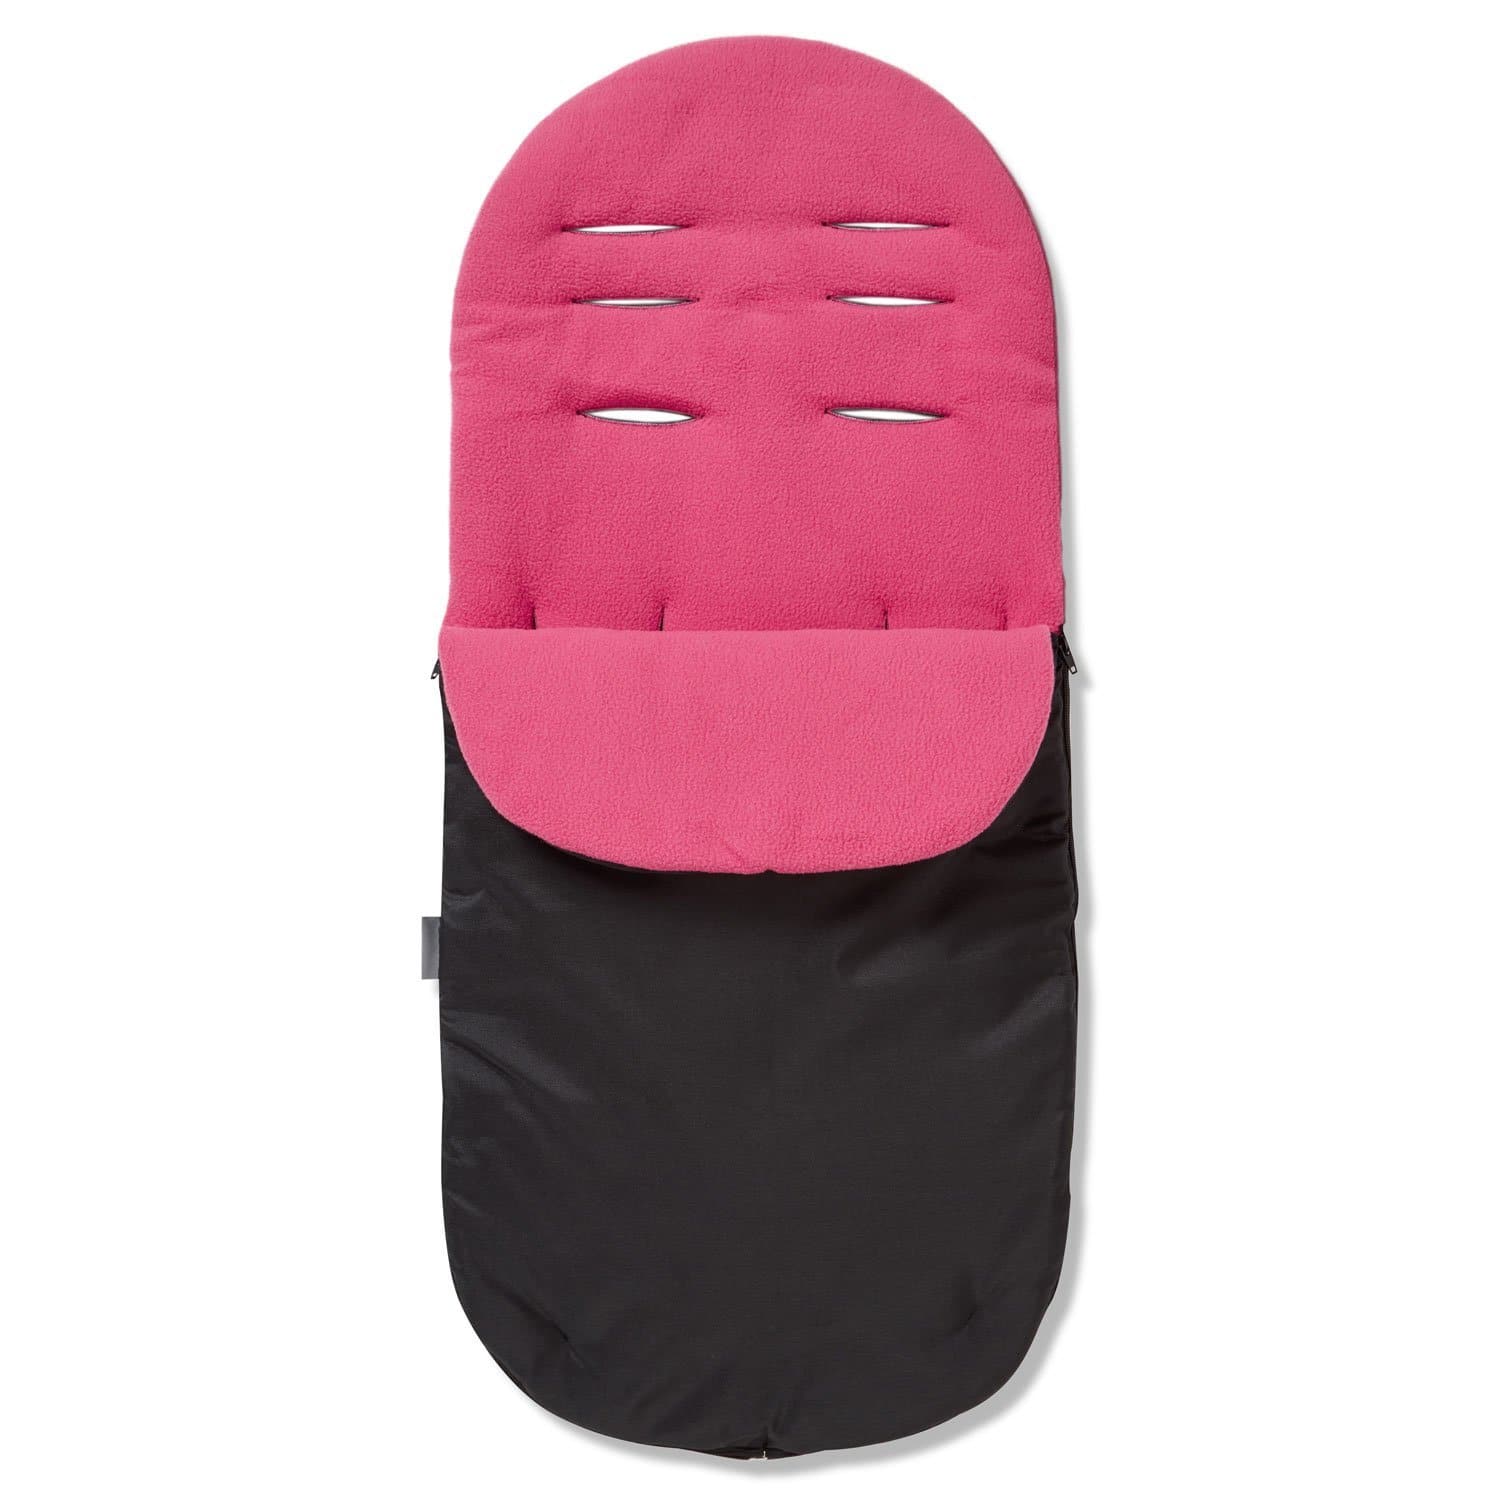 Footmuff / Cosy Toes Compatible with TFK - Dark Pink / Fits All Models | For Your Little One